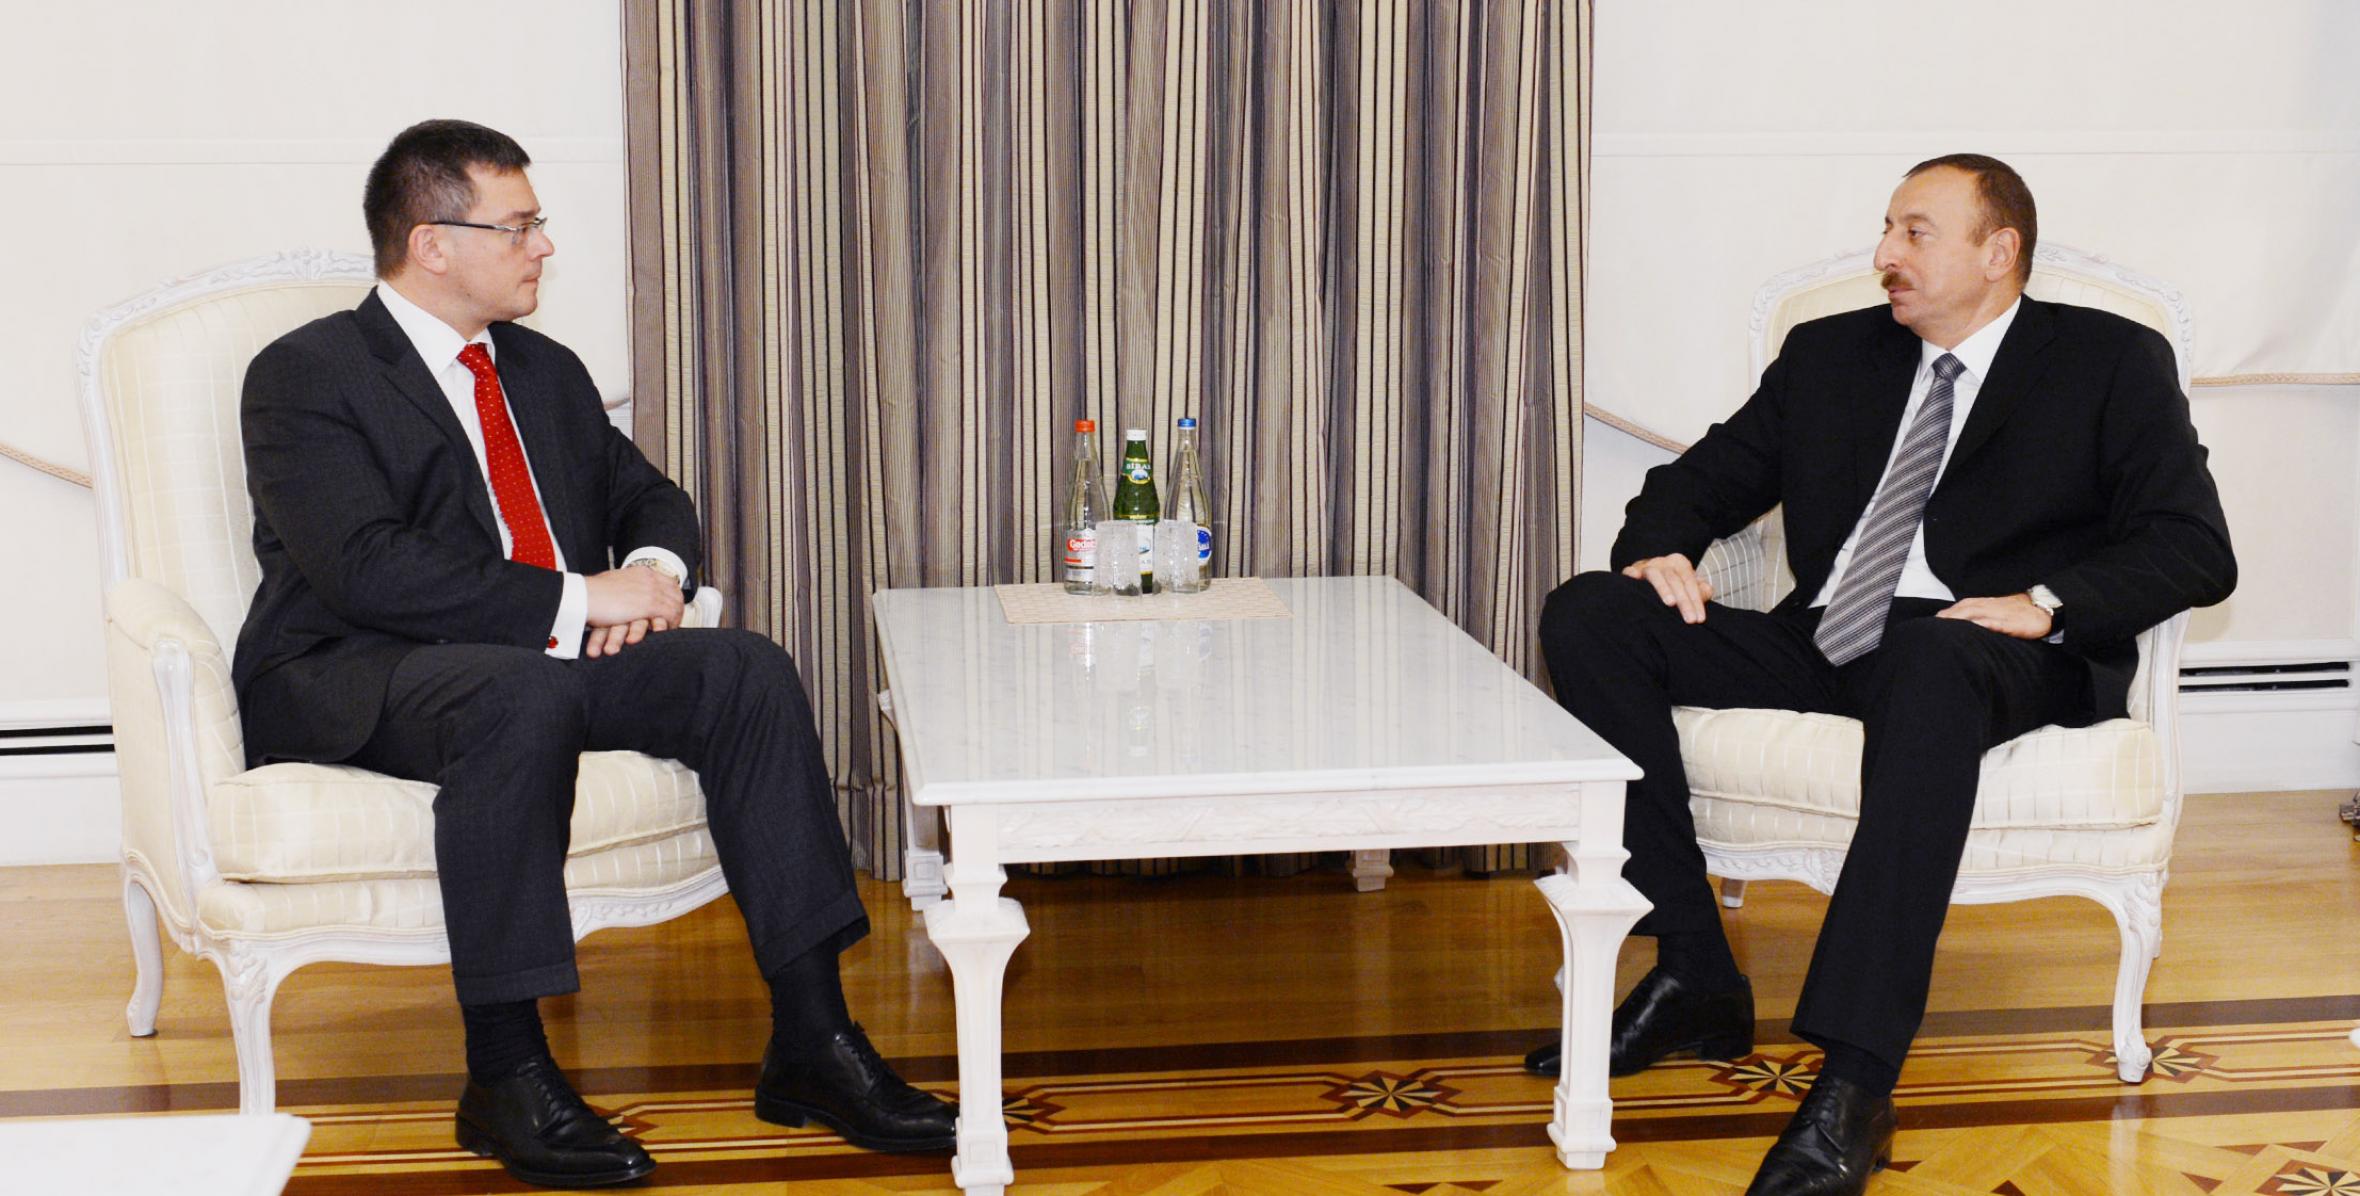 Ilham Aliyev received former Prime Minister of Romania, the founder and head of the Center-Right Civic Initiative, Mihai Razvan Ungureanu